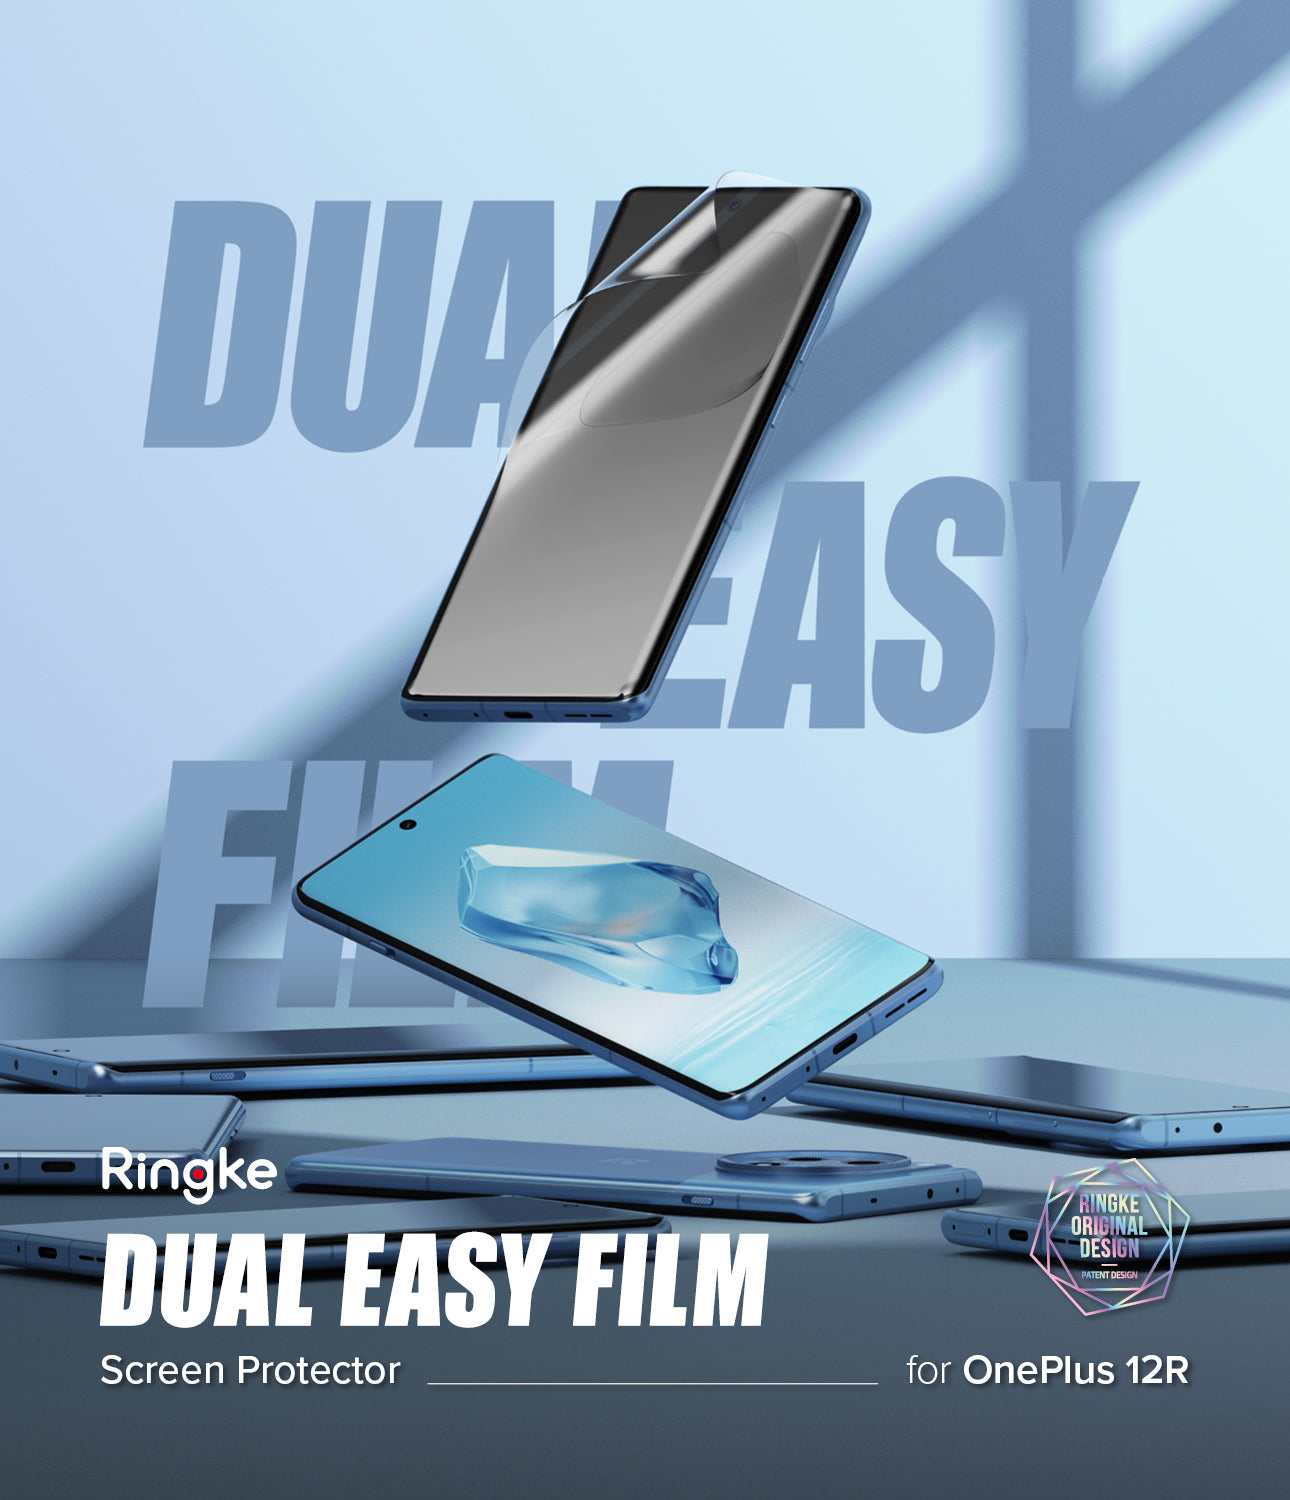 OnePlus 12R Screen Protector | Dual Easy Film - By Ringke